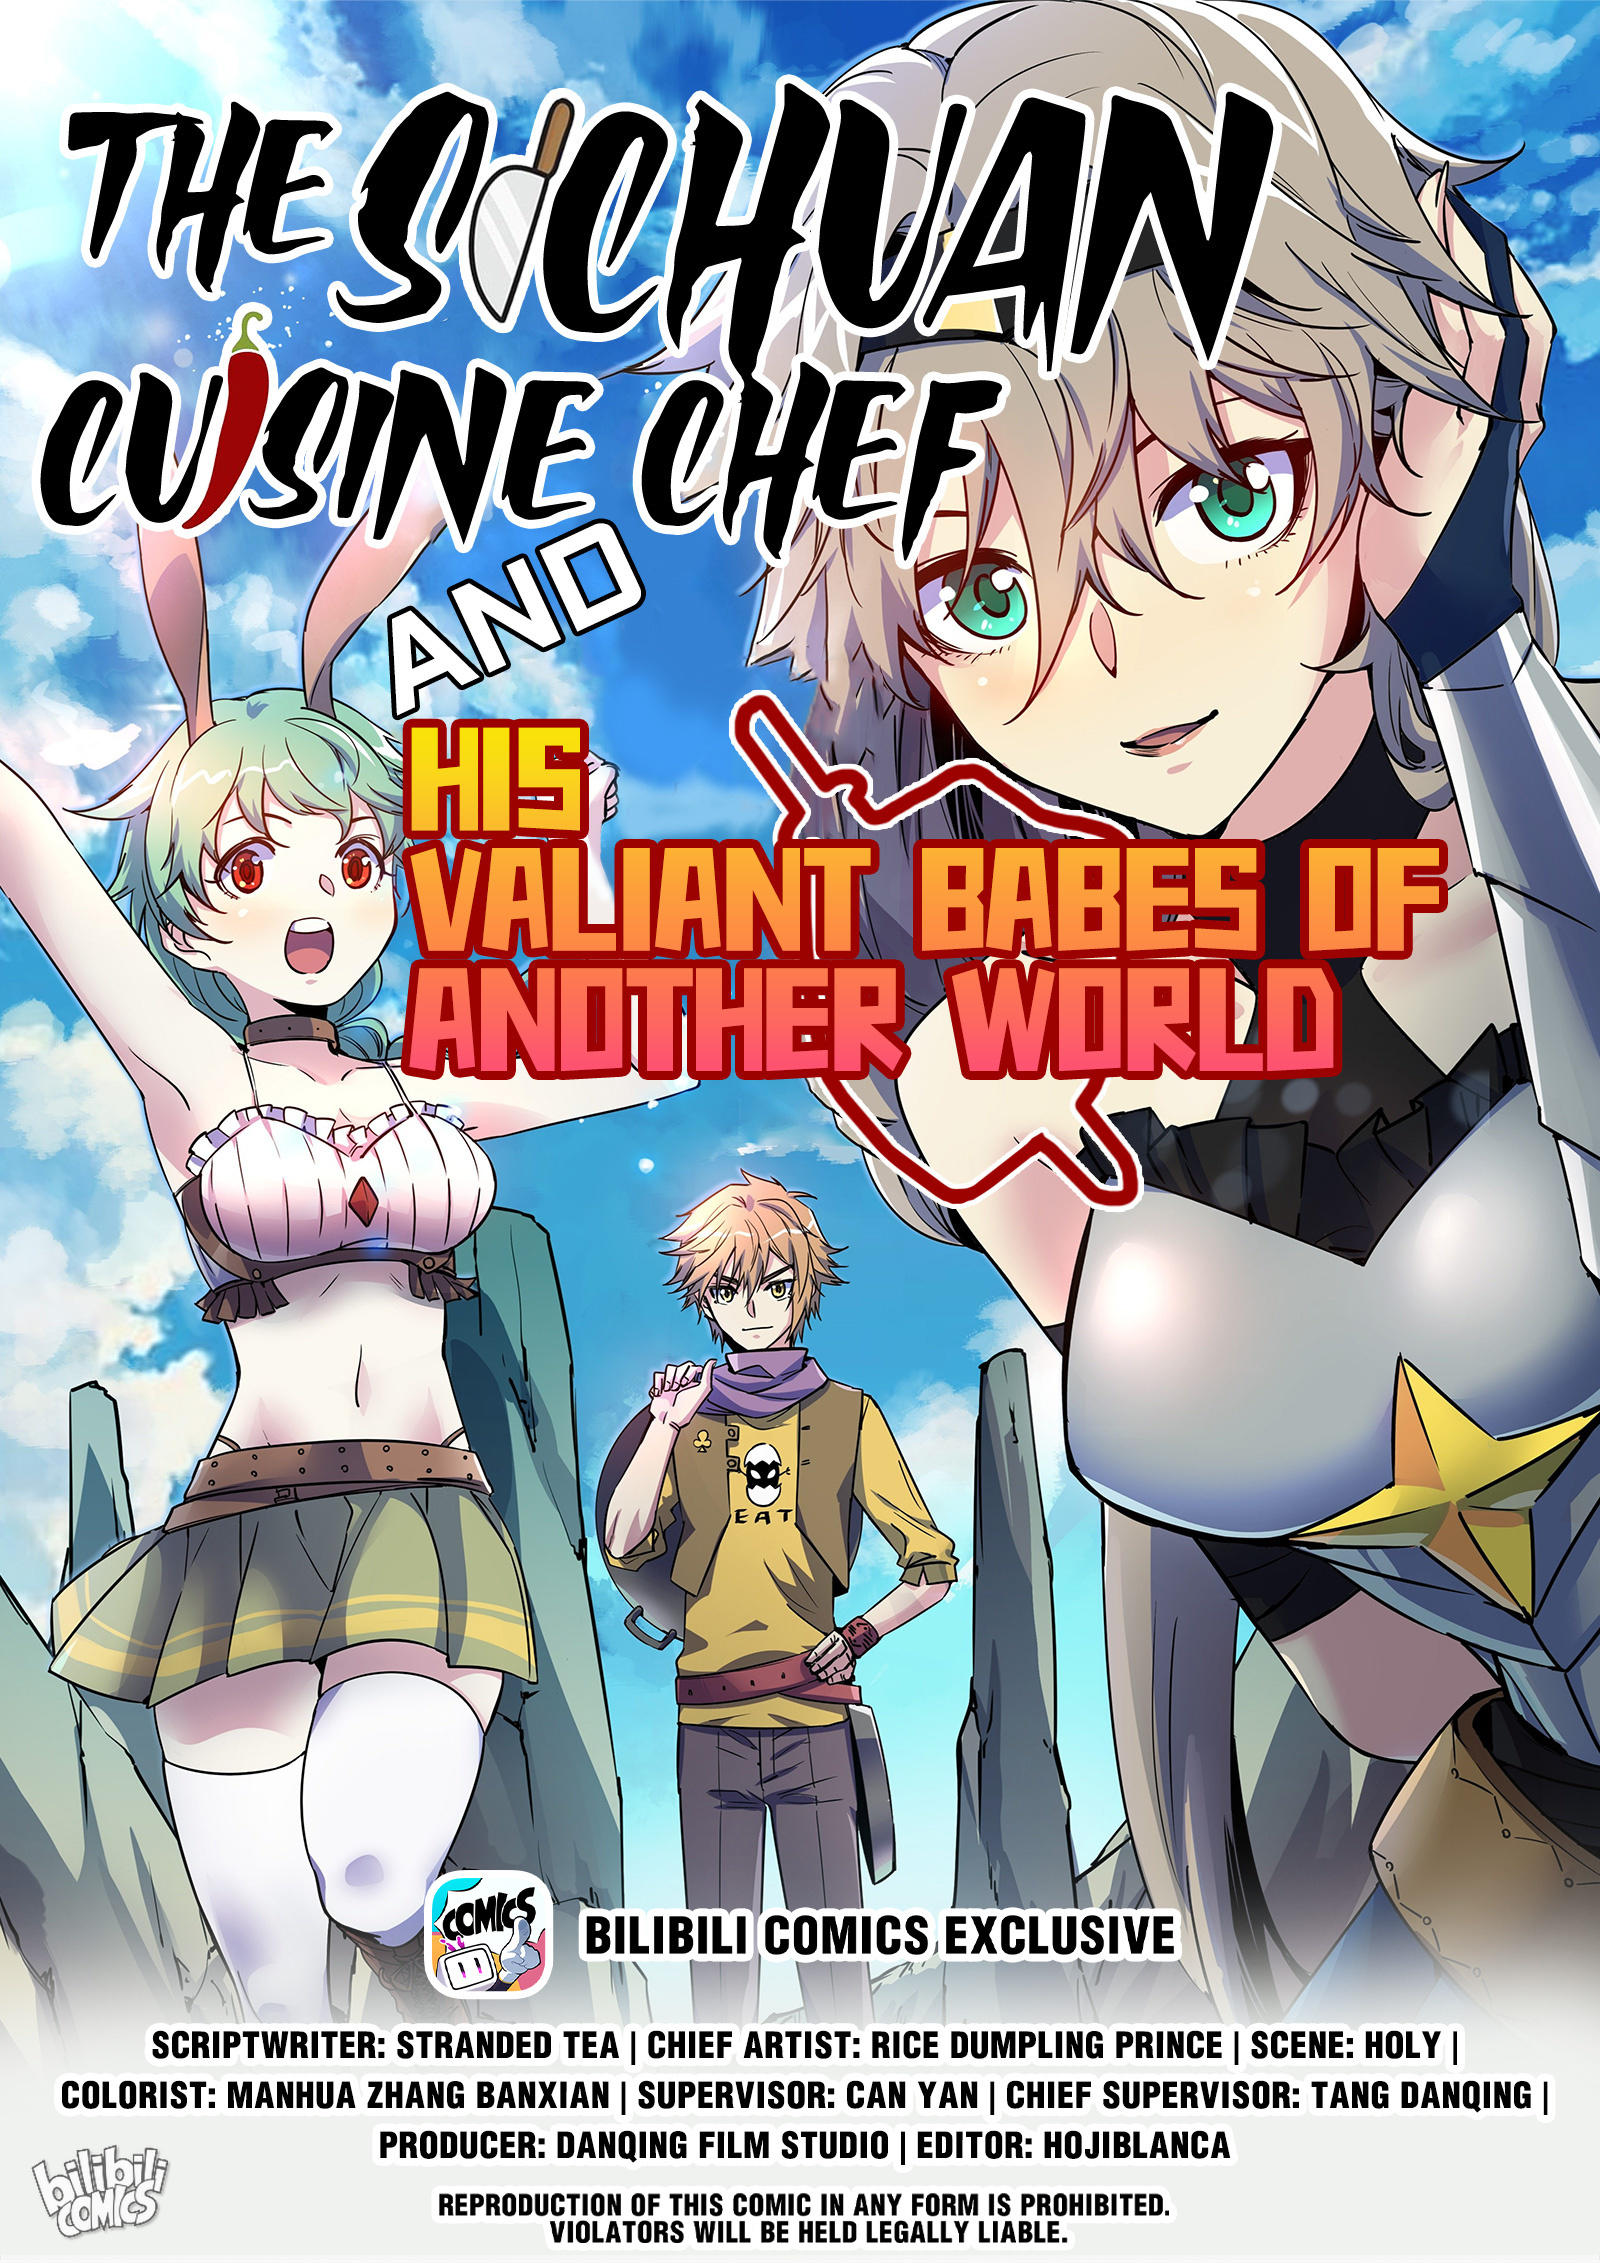 Manga Like The Sichuan Cuisine Chef and His Valiant Babes of Another World